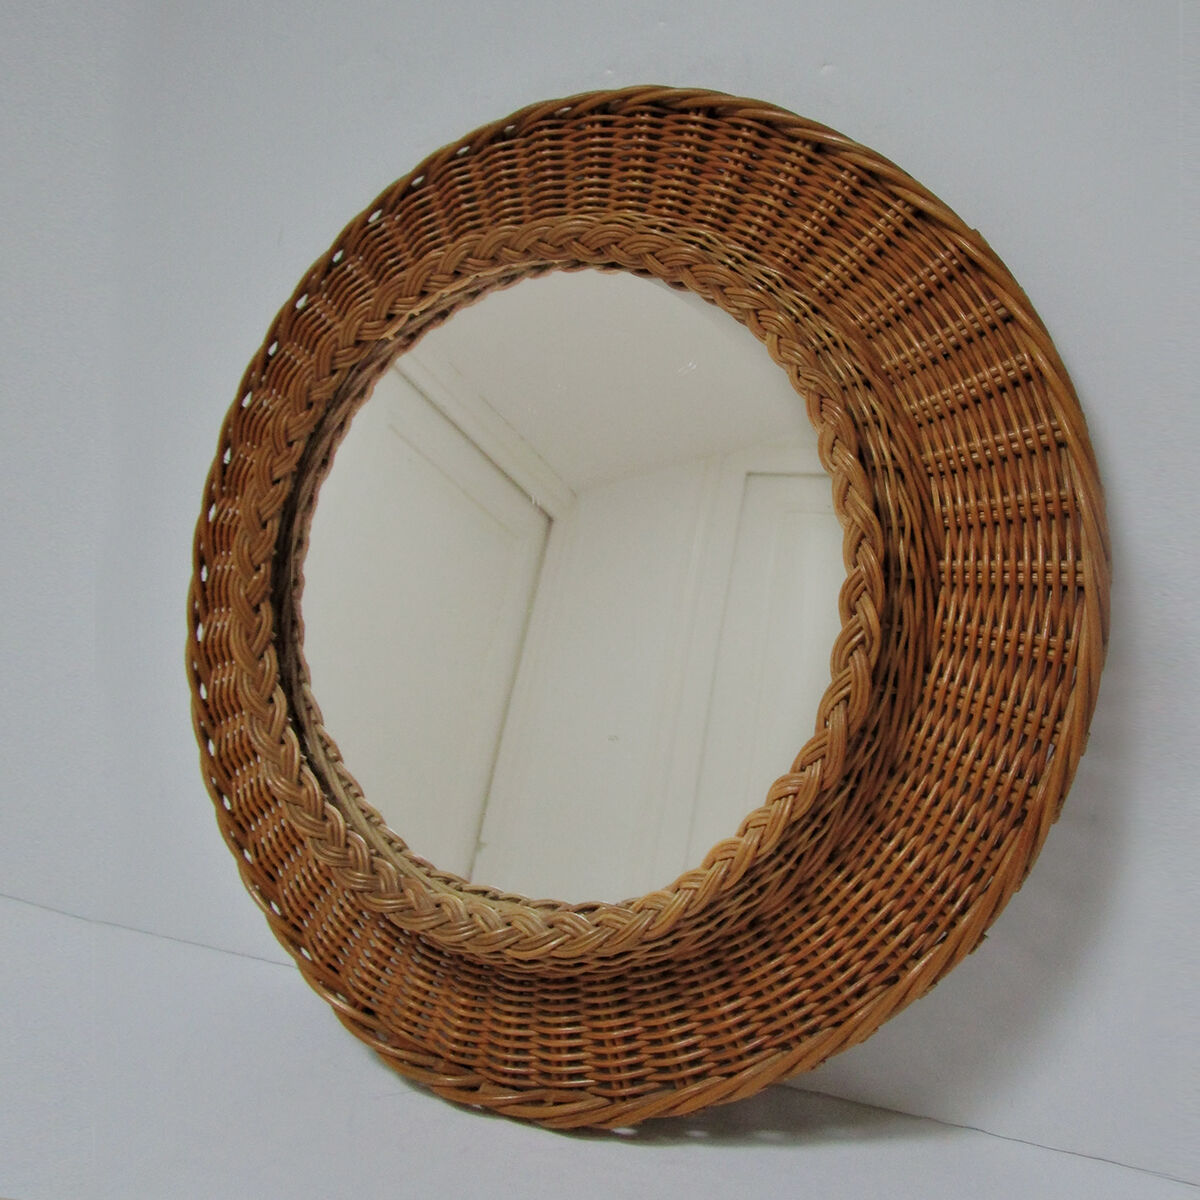 SEE OUR RATTAN MIRRORS FOR LESS THAN 100 EUROS